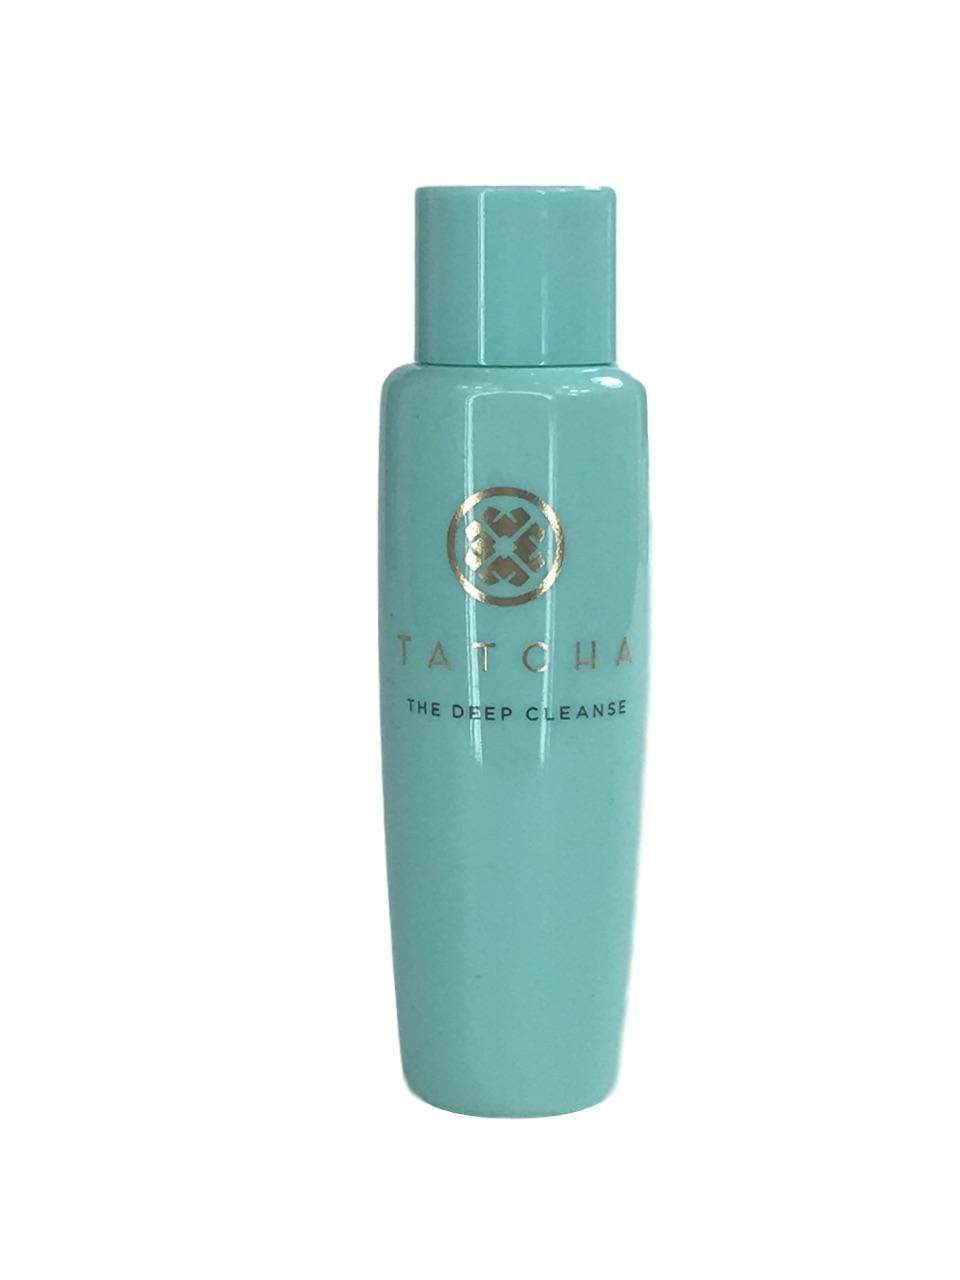 Tatcha The Deep Cleanse Travel Size, 25ml | 0.85oz, Skin Care, London Loves Beauty